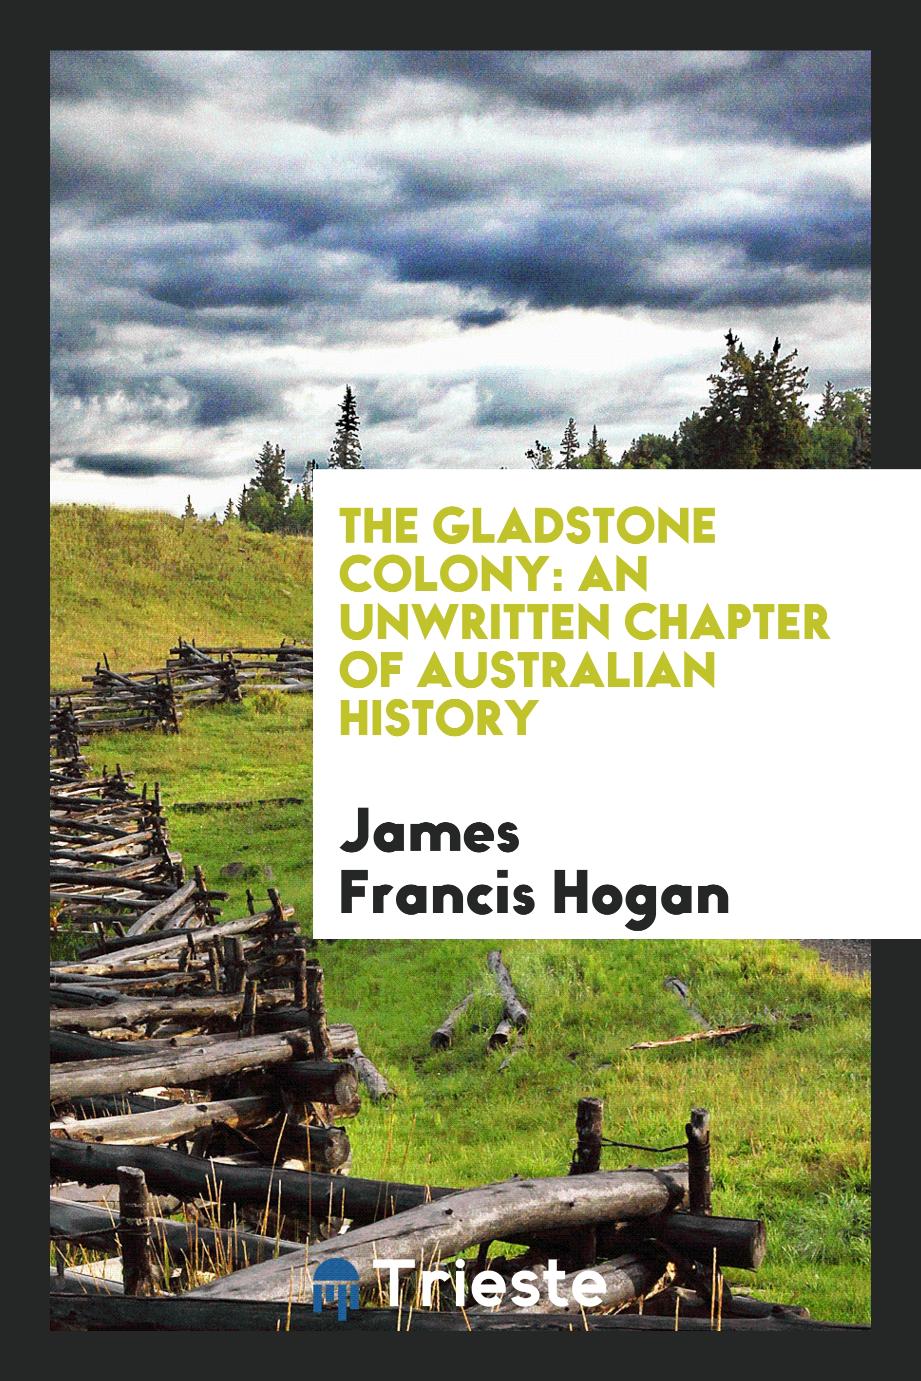 The Gladstone Colony: An Unwritten Chapter of Australian History